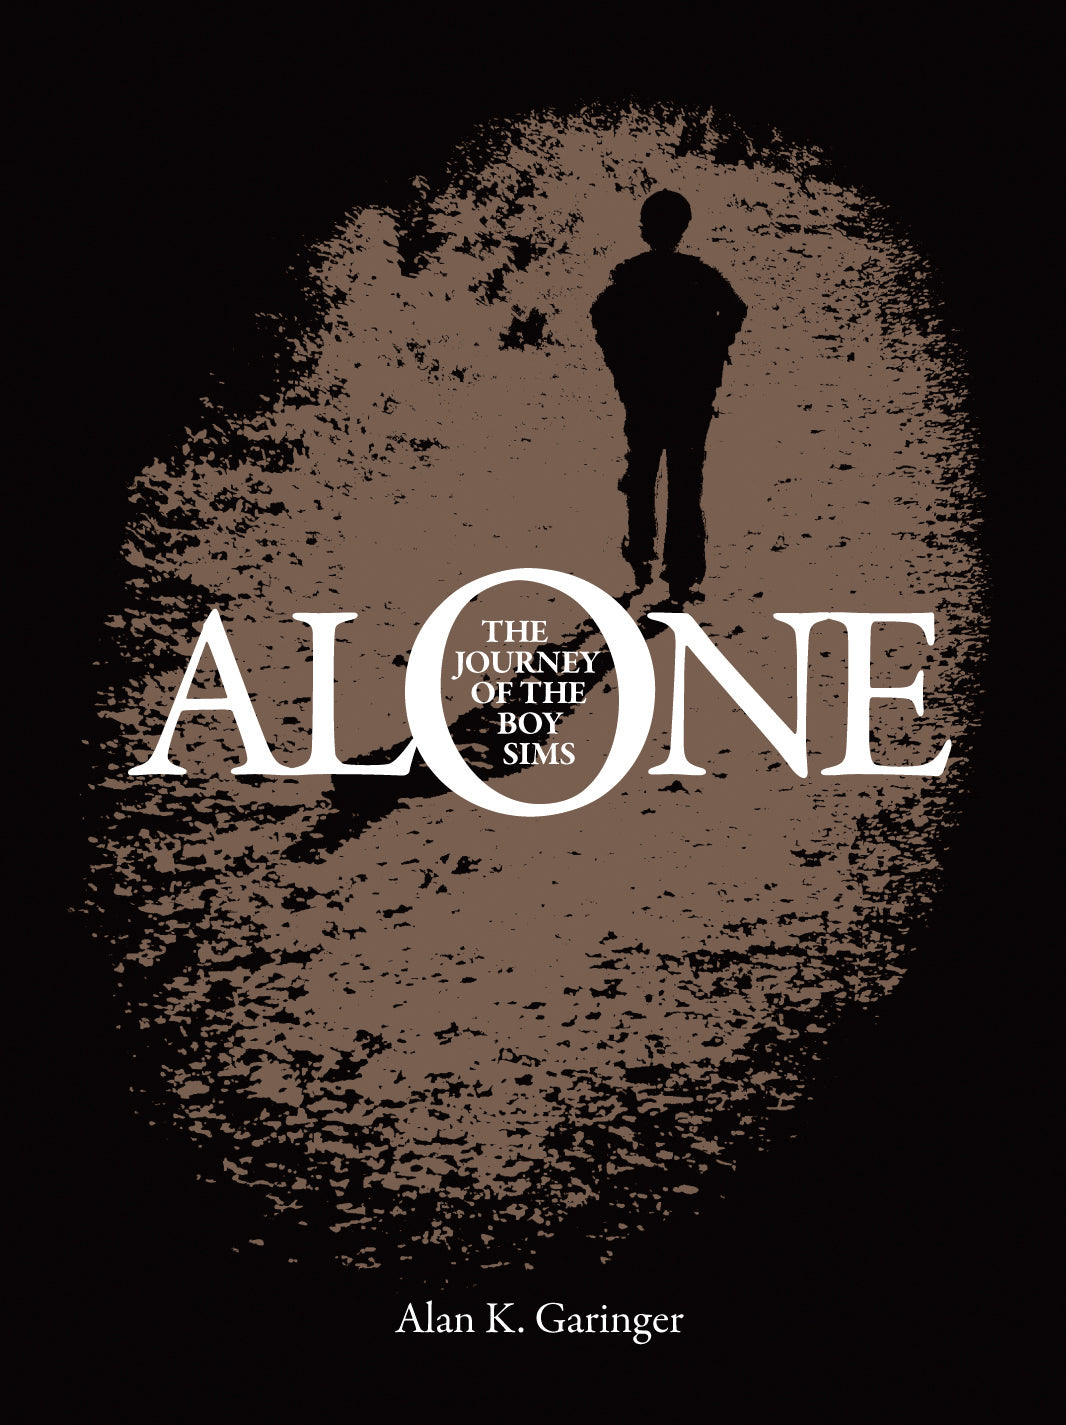 Alone: The Journey of the Boy Sims Hardcover